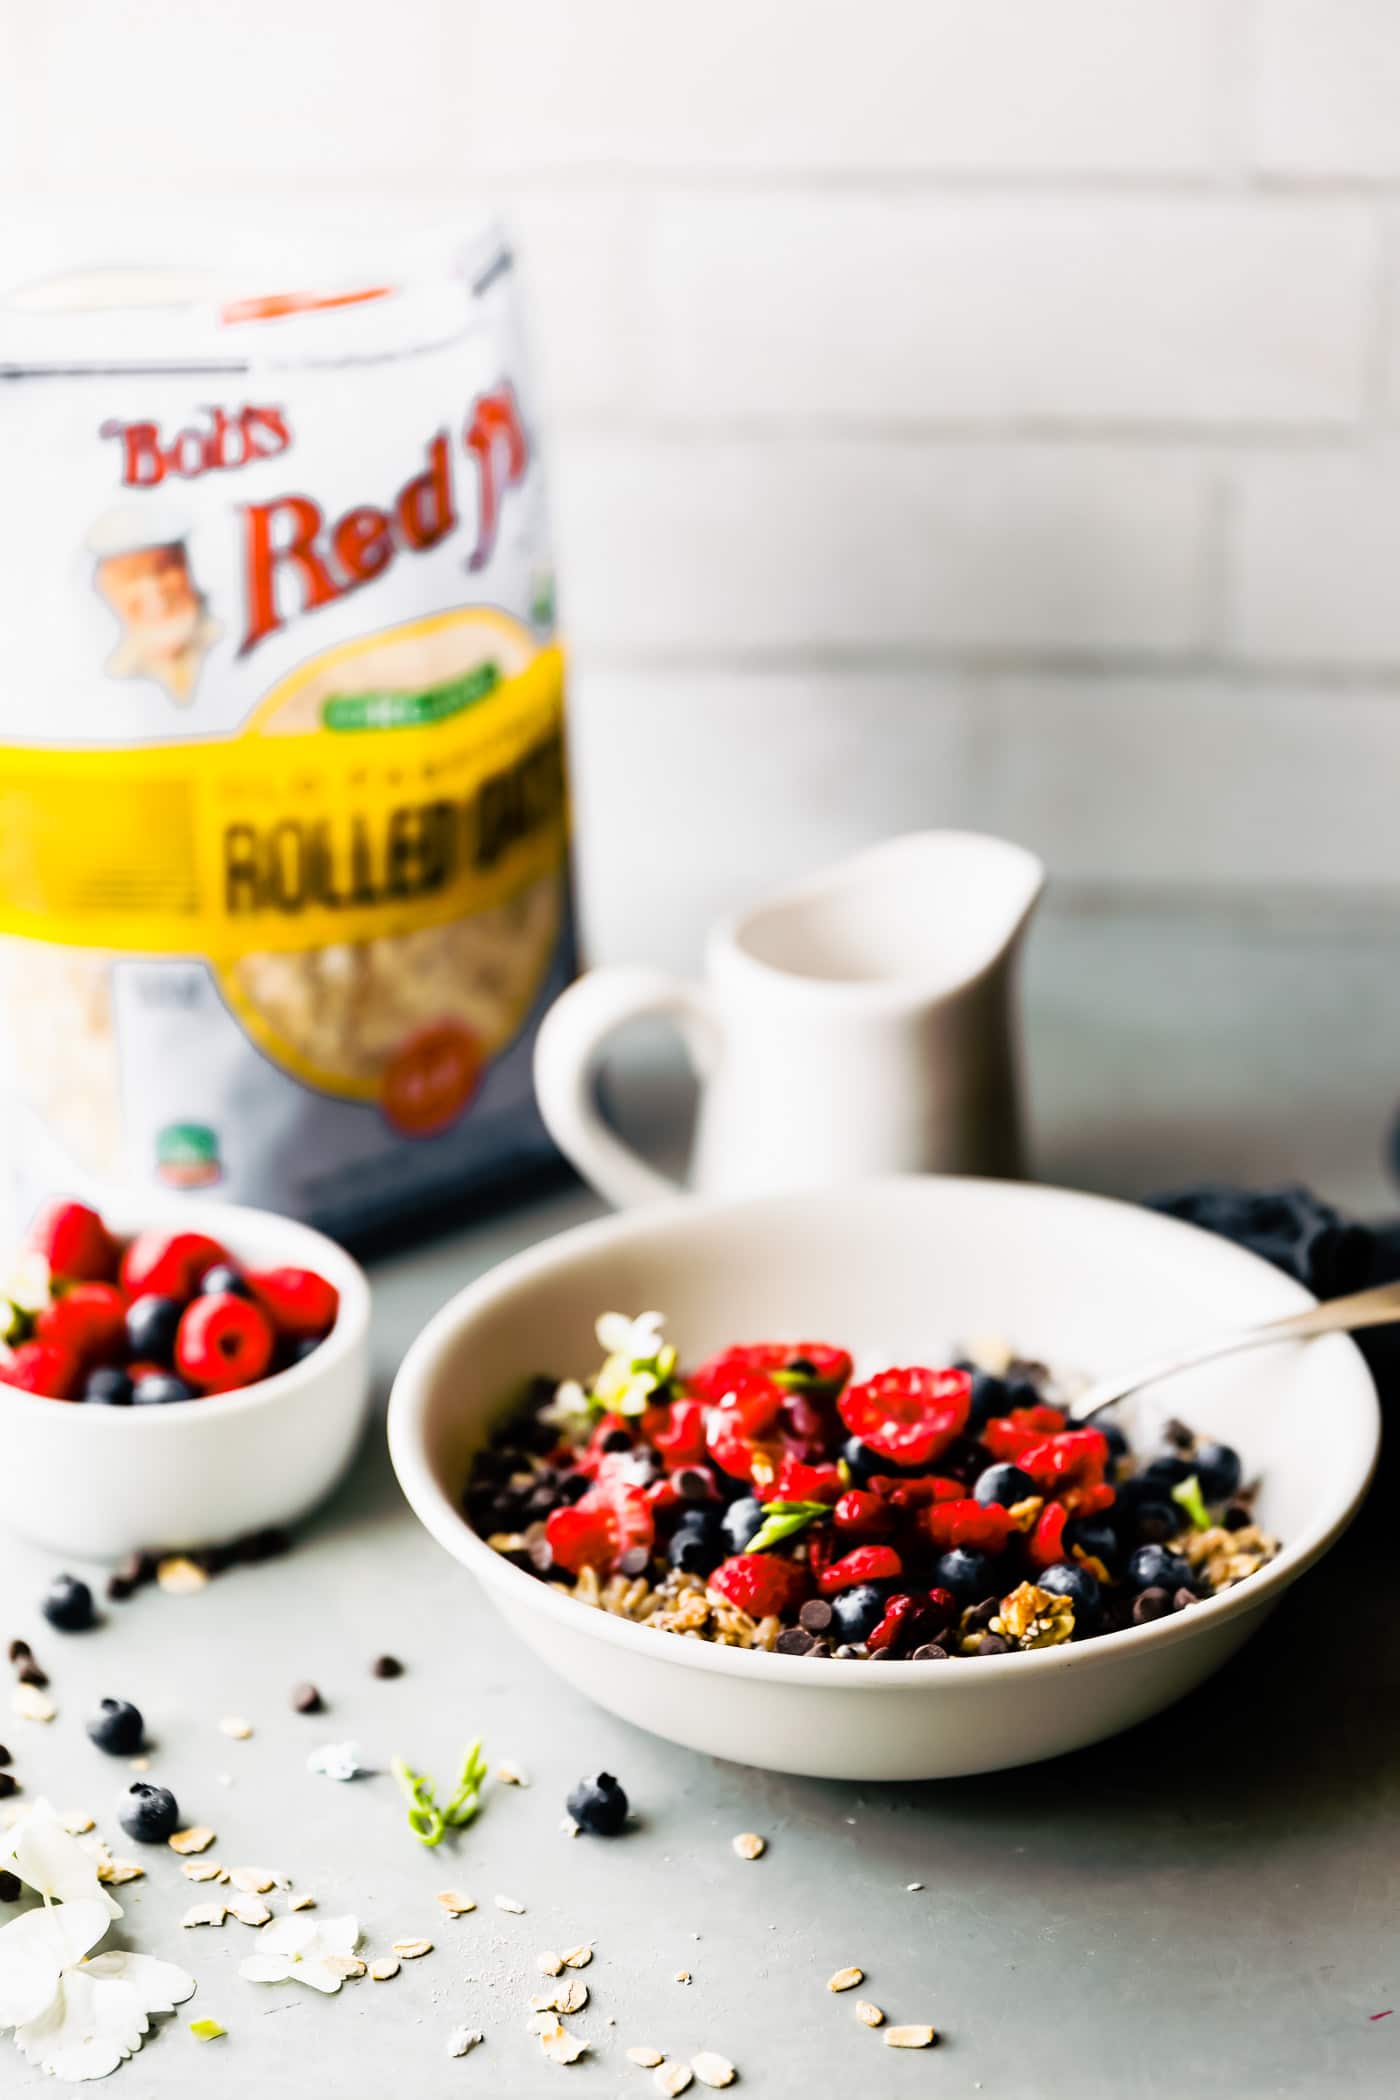 Side view bowl of breakfast power bowl filled with oats, seeds, fresh berries, and mini chocolate chips, milk pitcher and bag of oats in the background.